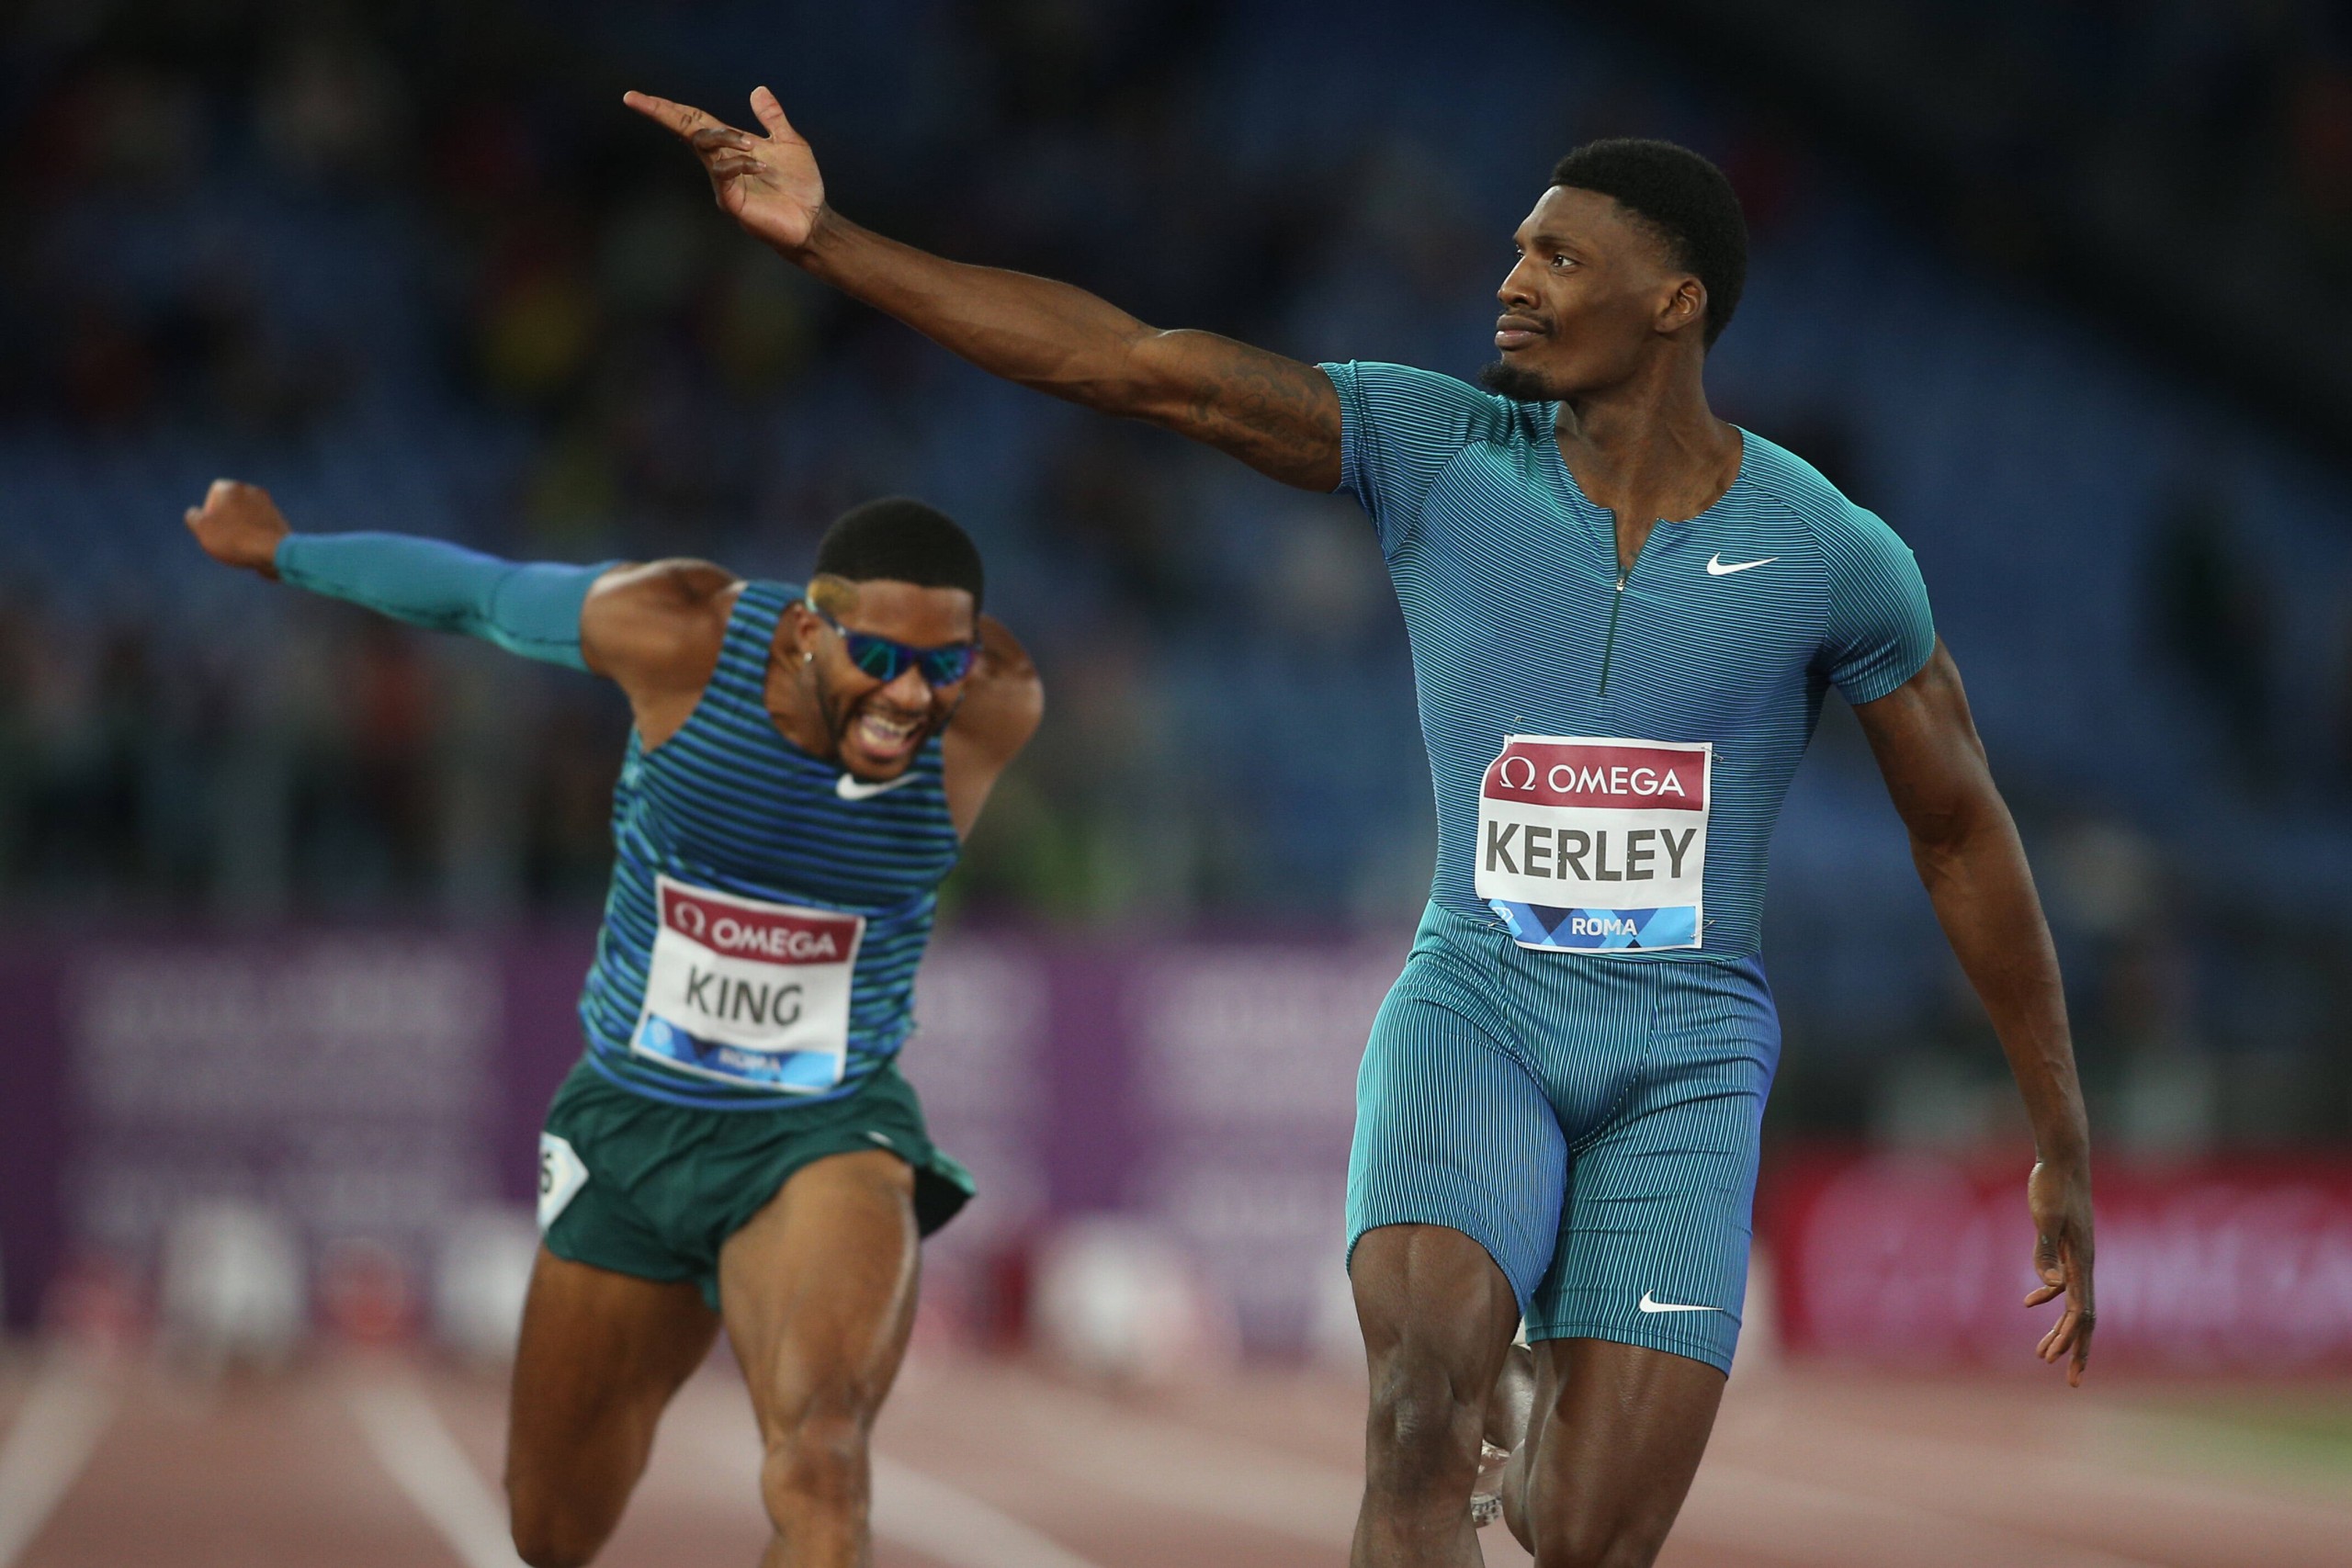 ROME, Italy - 09.06.2022: KERLEY Fred compete and win 100 M MEN in the IAAF Wanda Diamond League - Golden Gala meeting 2022 in Stadio Olimpico in Rome. PUBLICATIONxNOTxINxITA Copyright: xMarcoxIacobuccix/xipa-agency.netx/xMarcoxIacobuccix 0